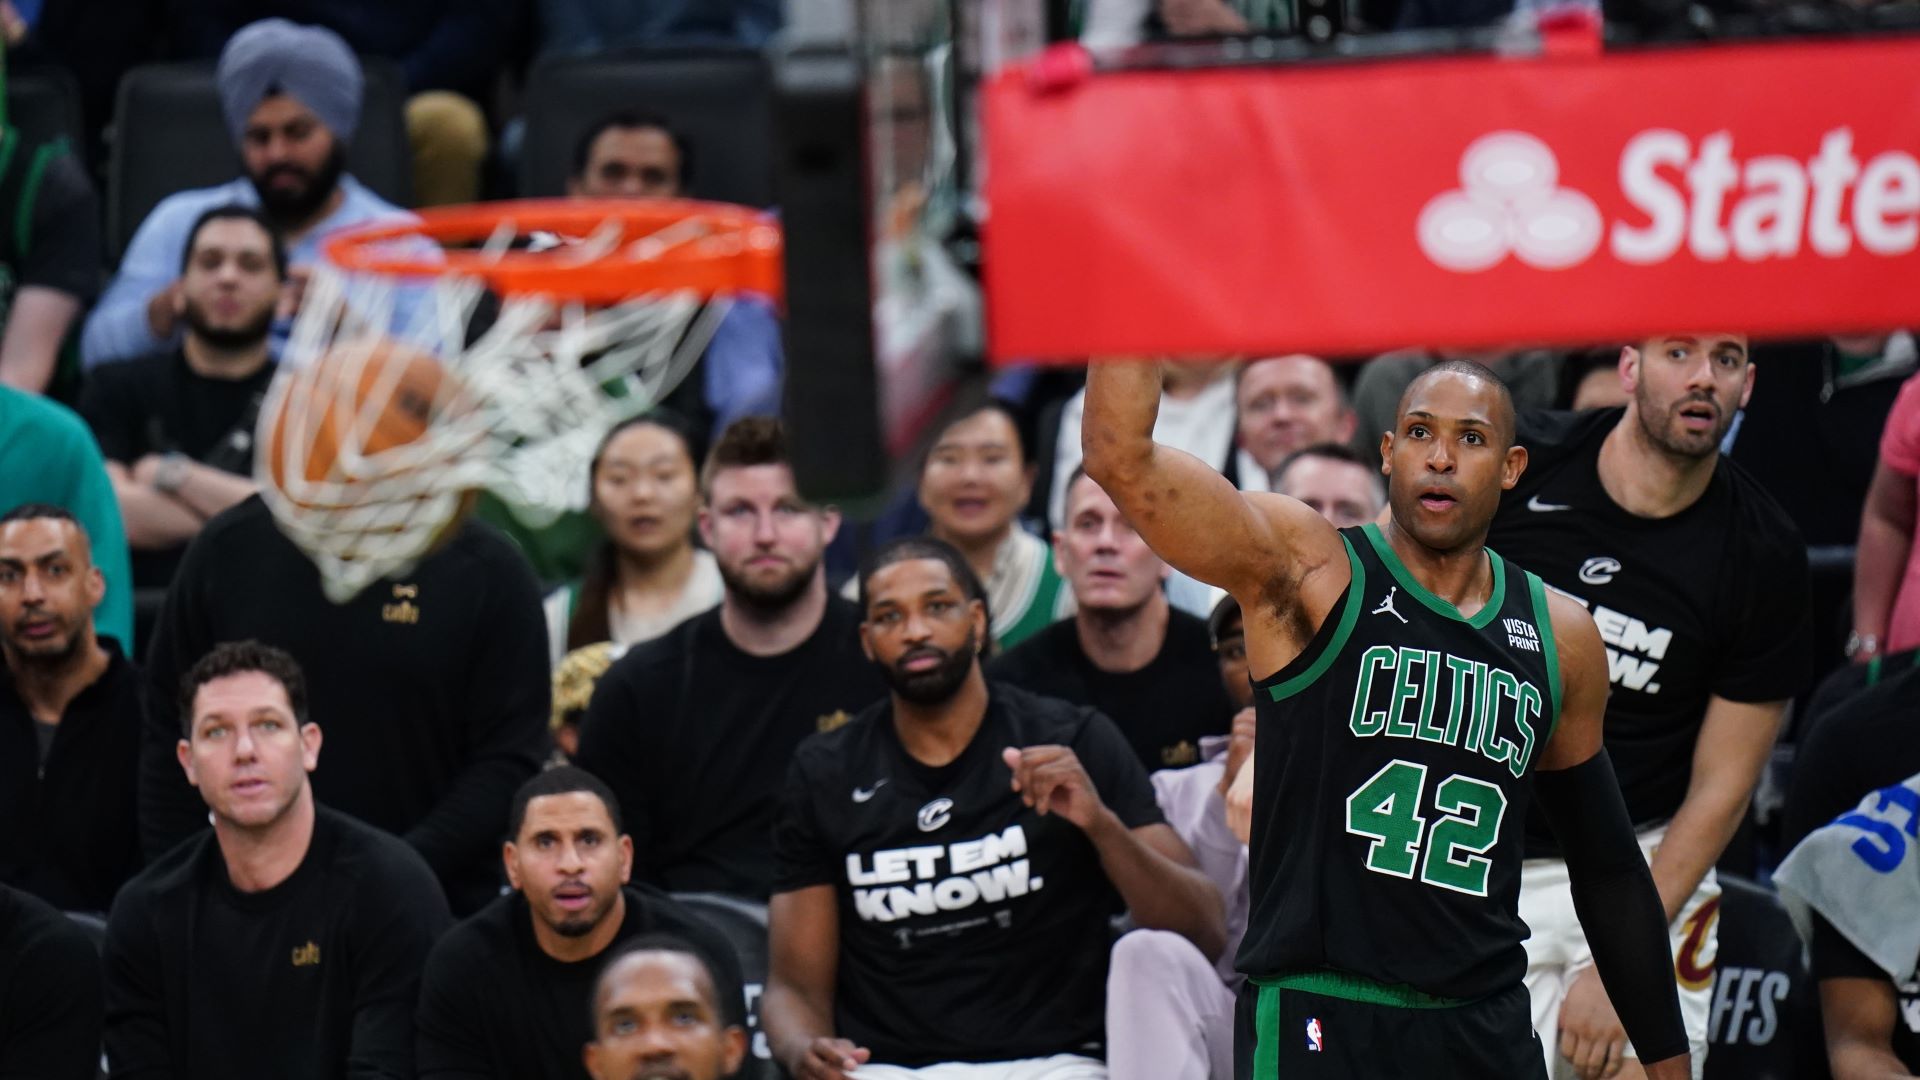 Al Horford’s ‘Phenomenal’ Game 5 Earns High Praise From Cavs
Coach